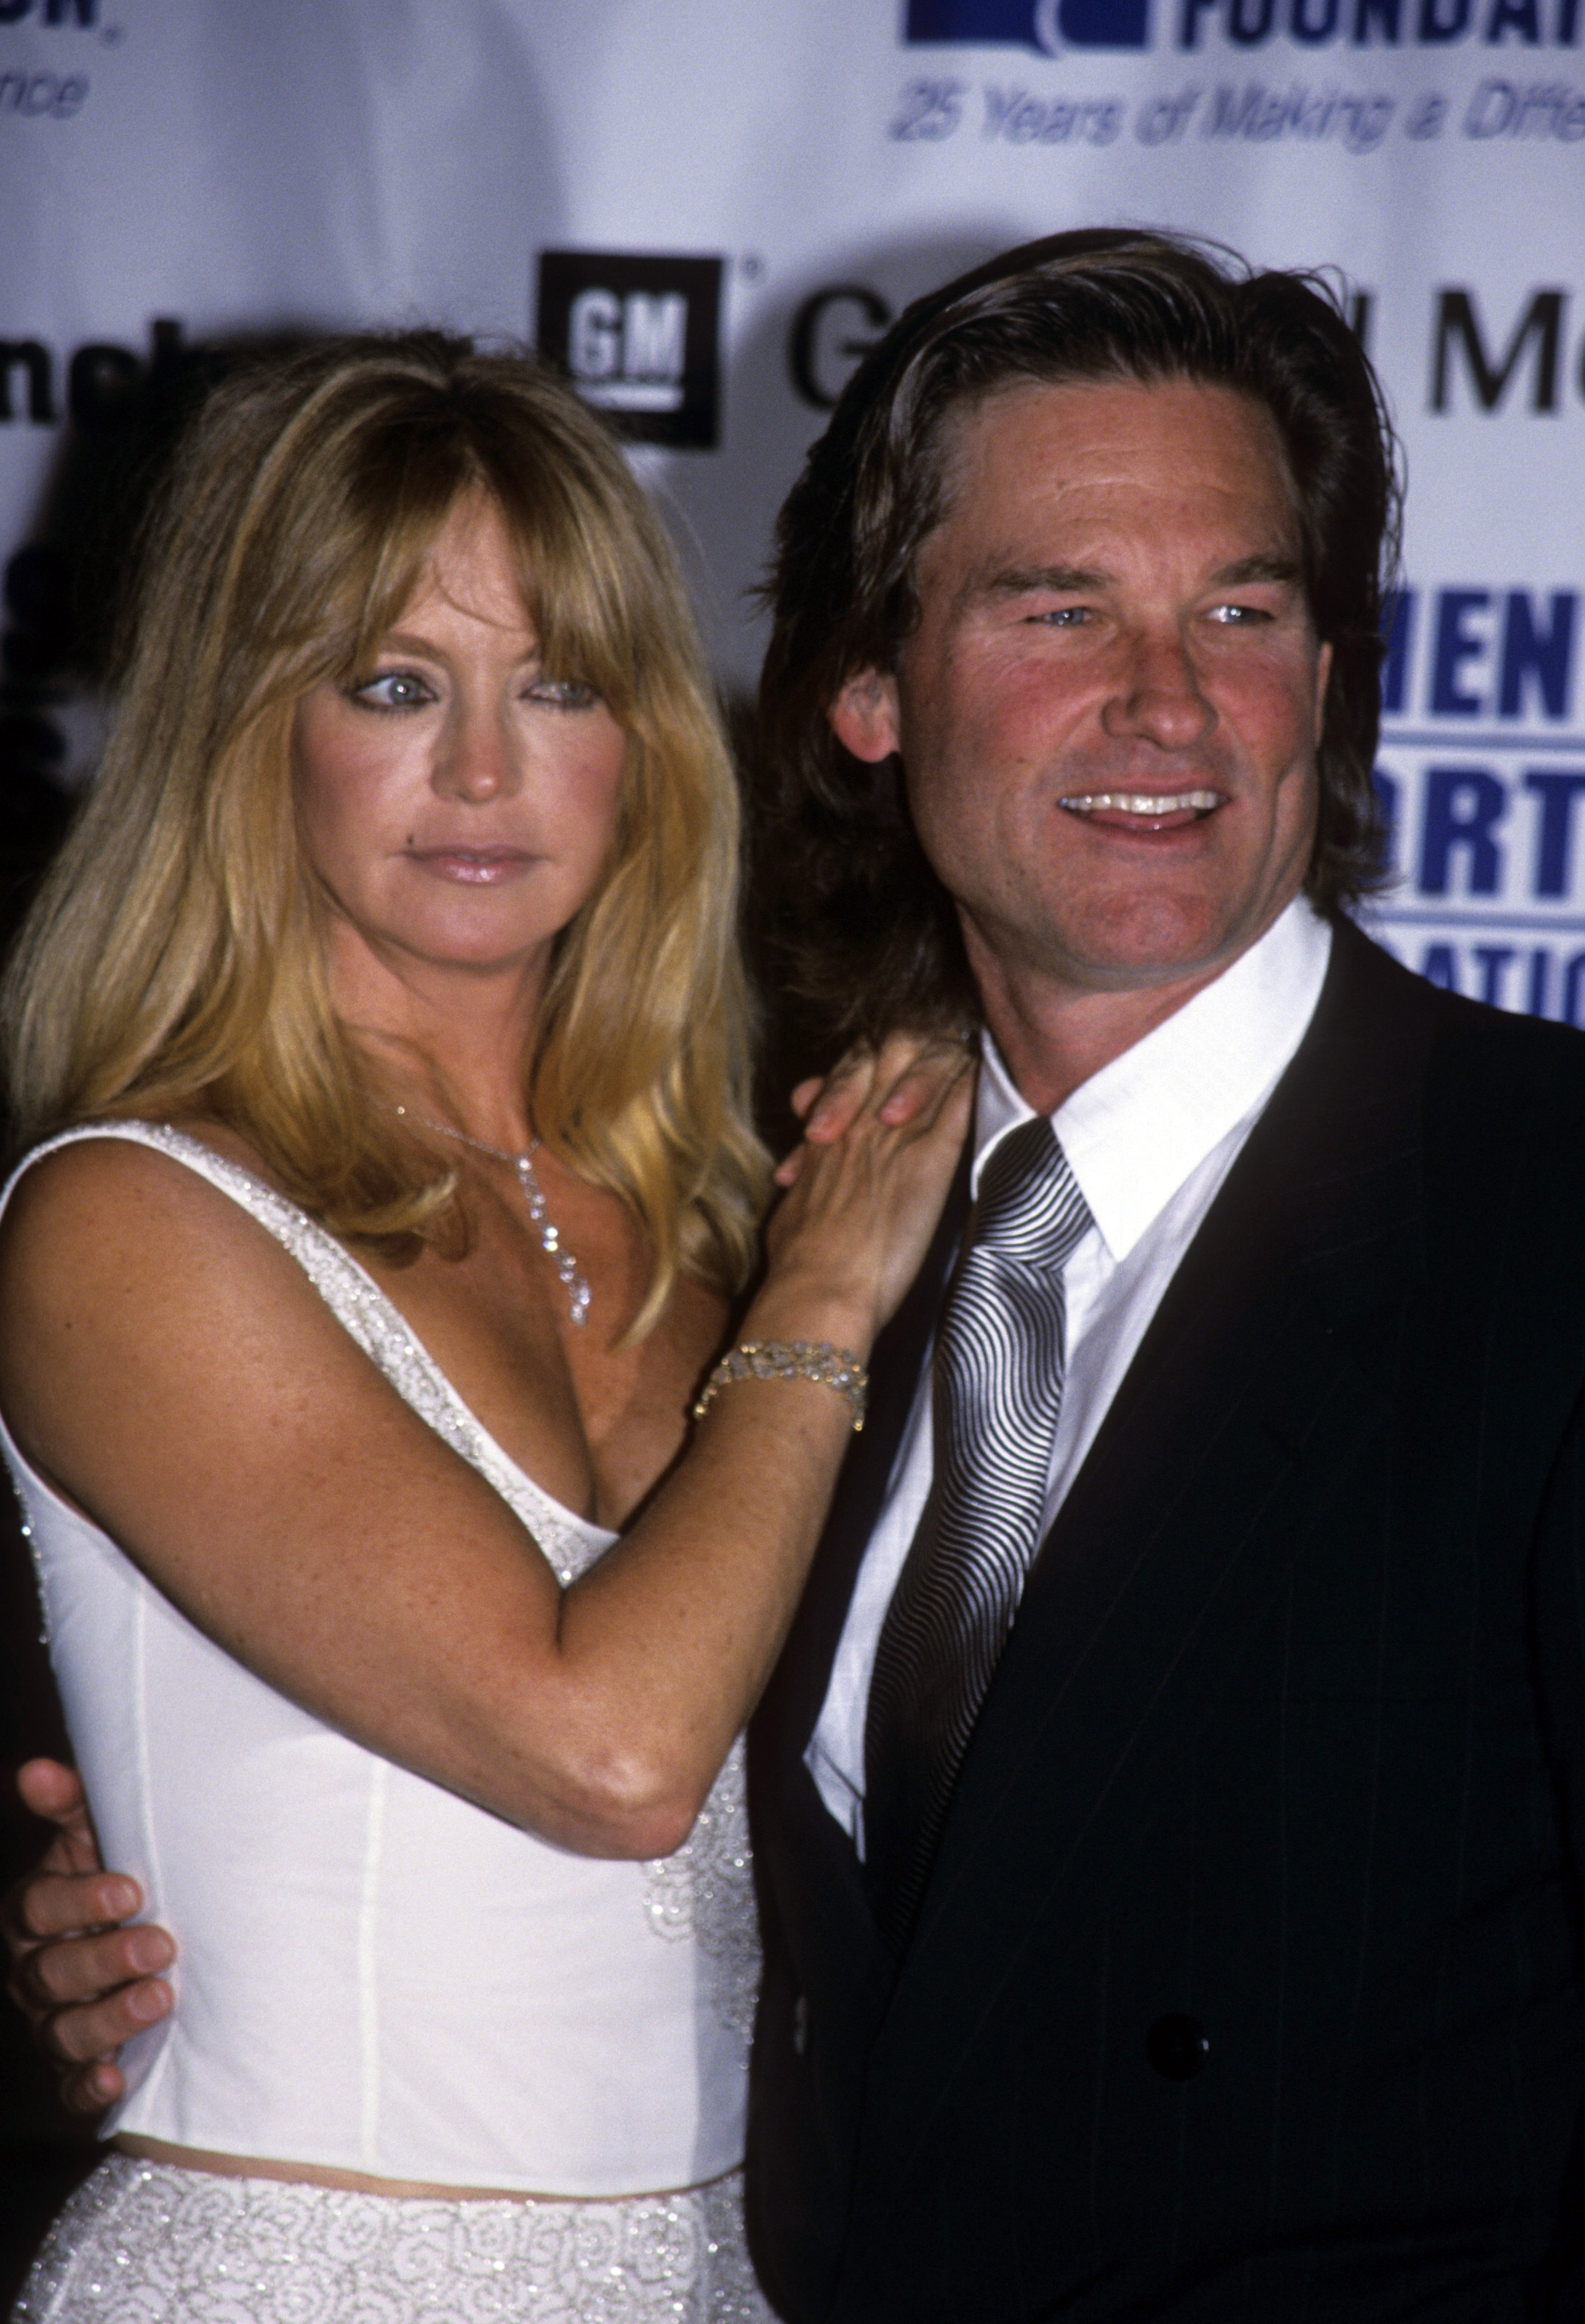 Goldie Hawn and Kurt Russell in New York, October 18, 1999. | Source: Getty Images